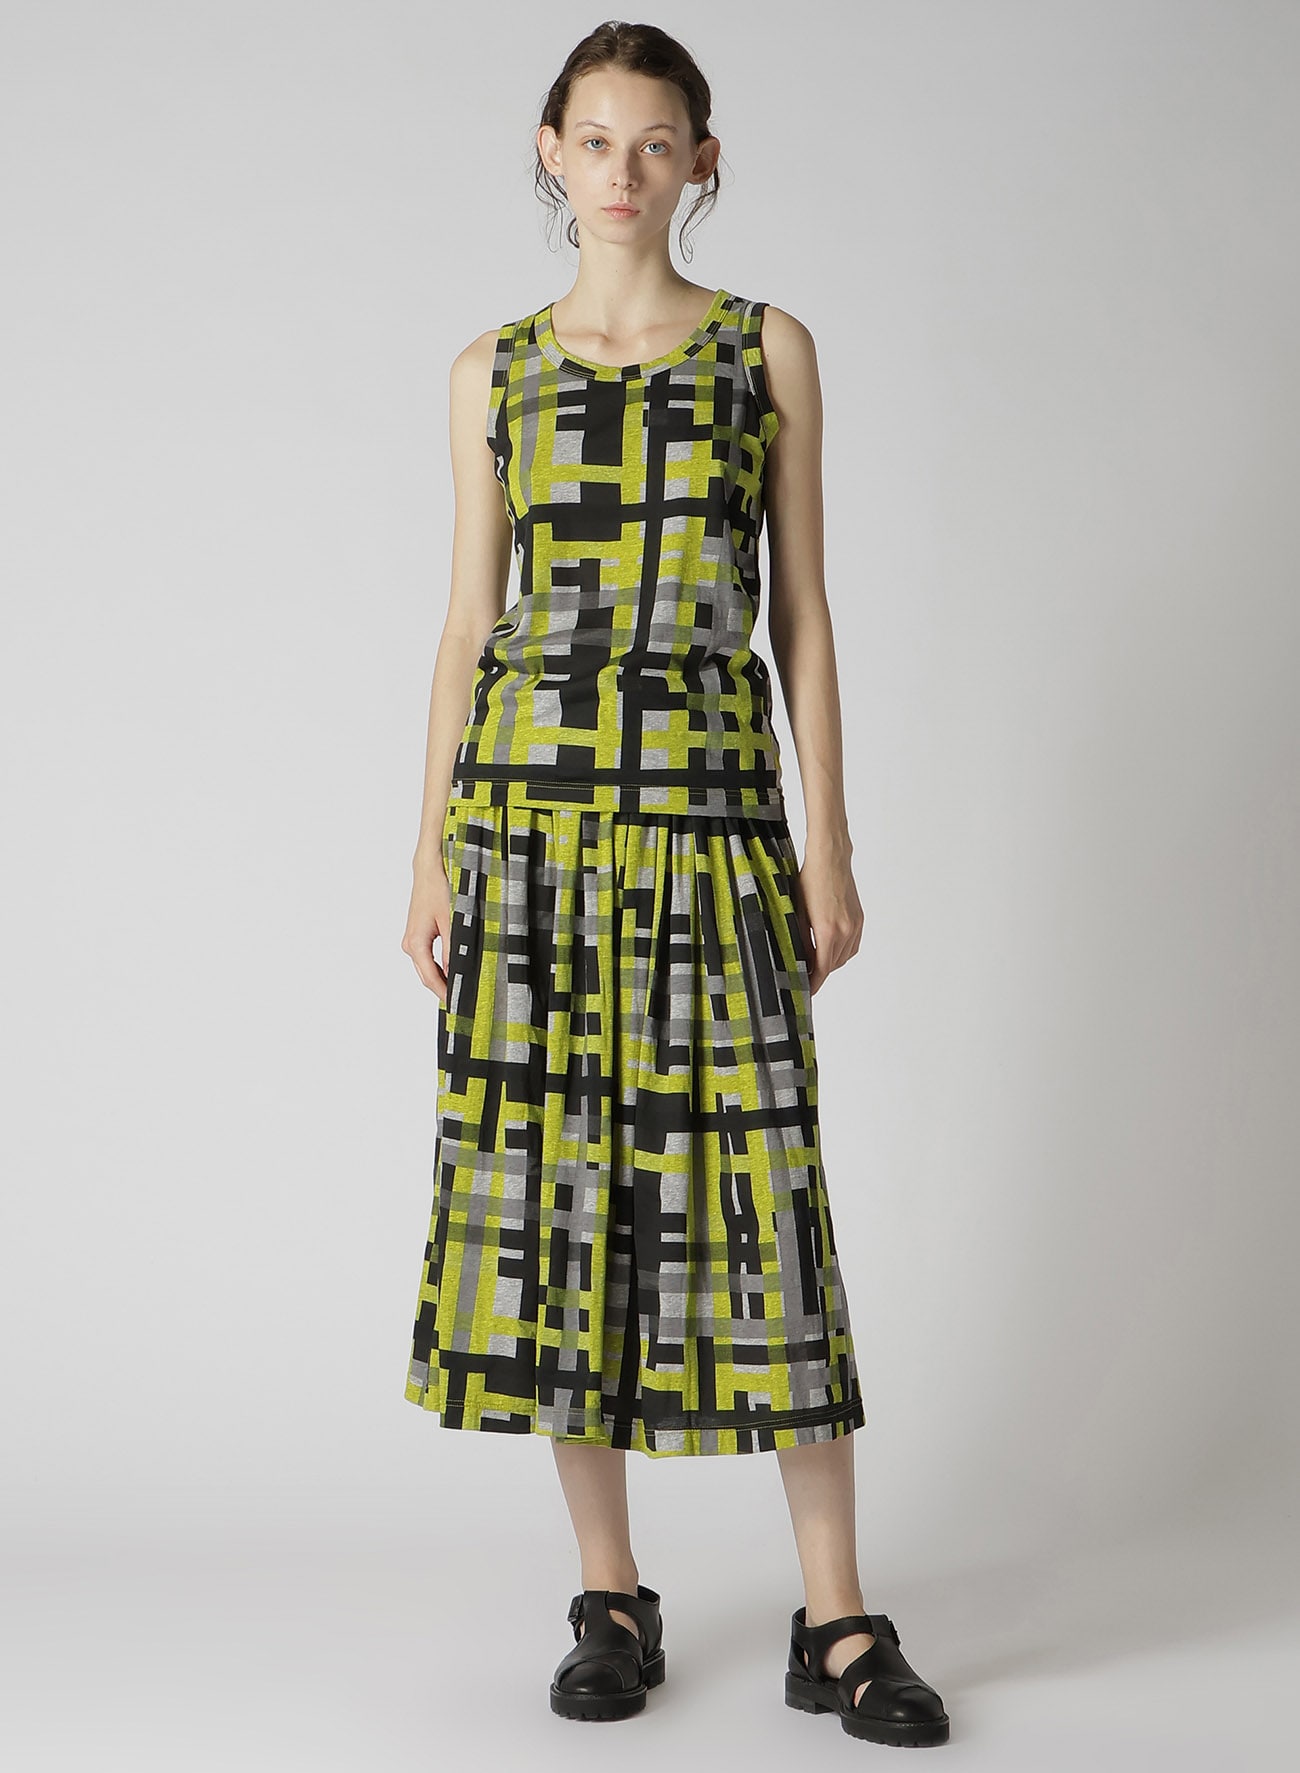 JERSEY PIGMENT CHECK PRINT GATHERED SKIRT(S Yellow): Y's｜THE SHOP 